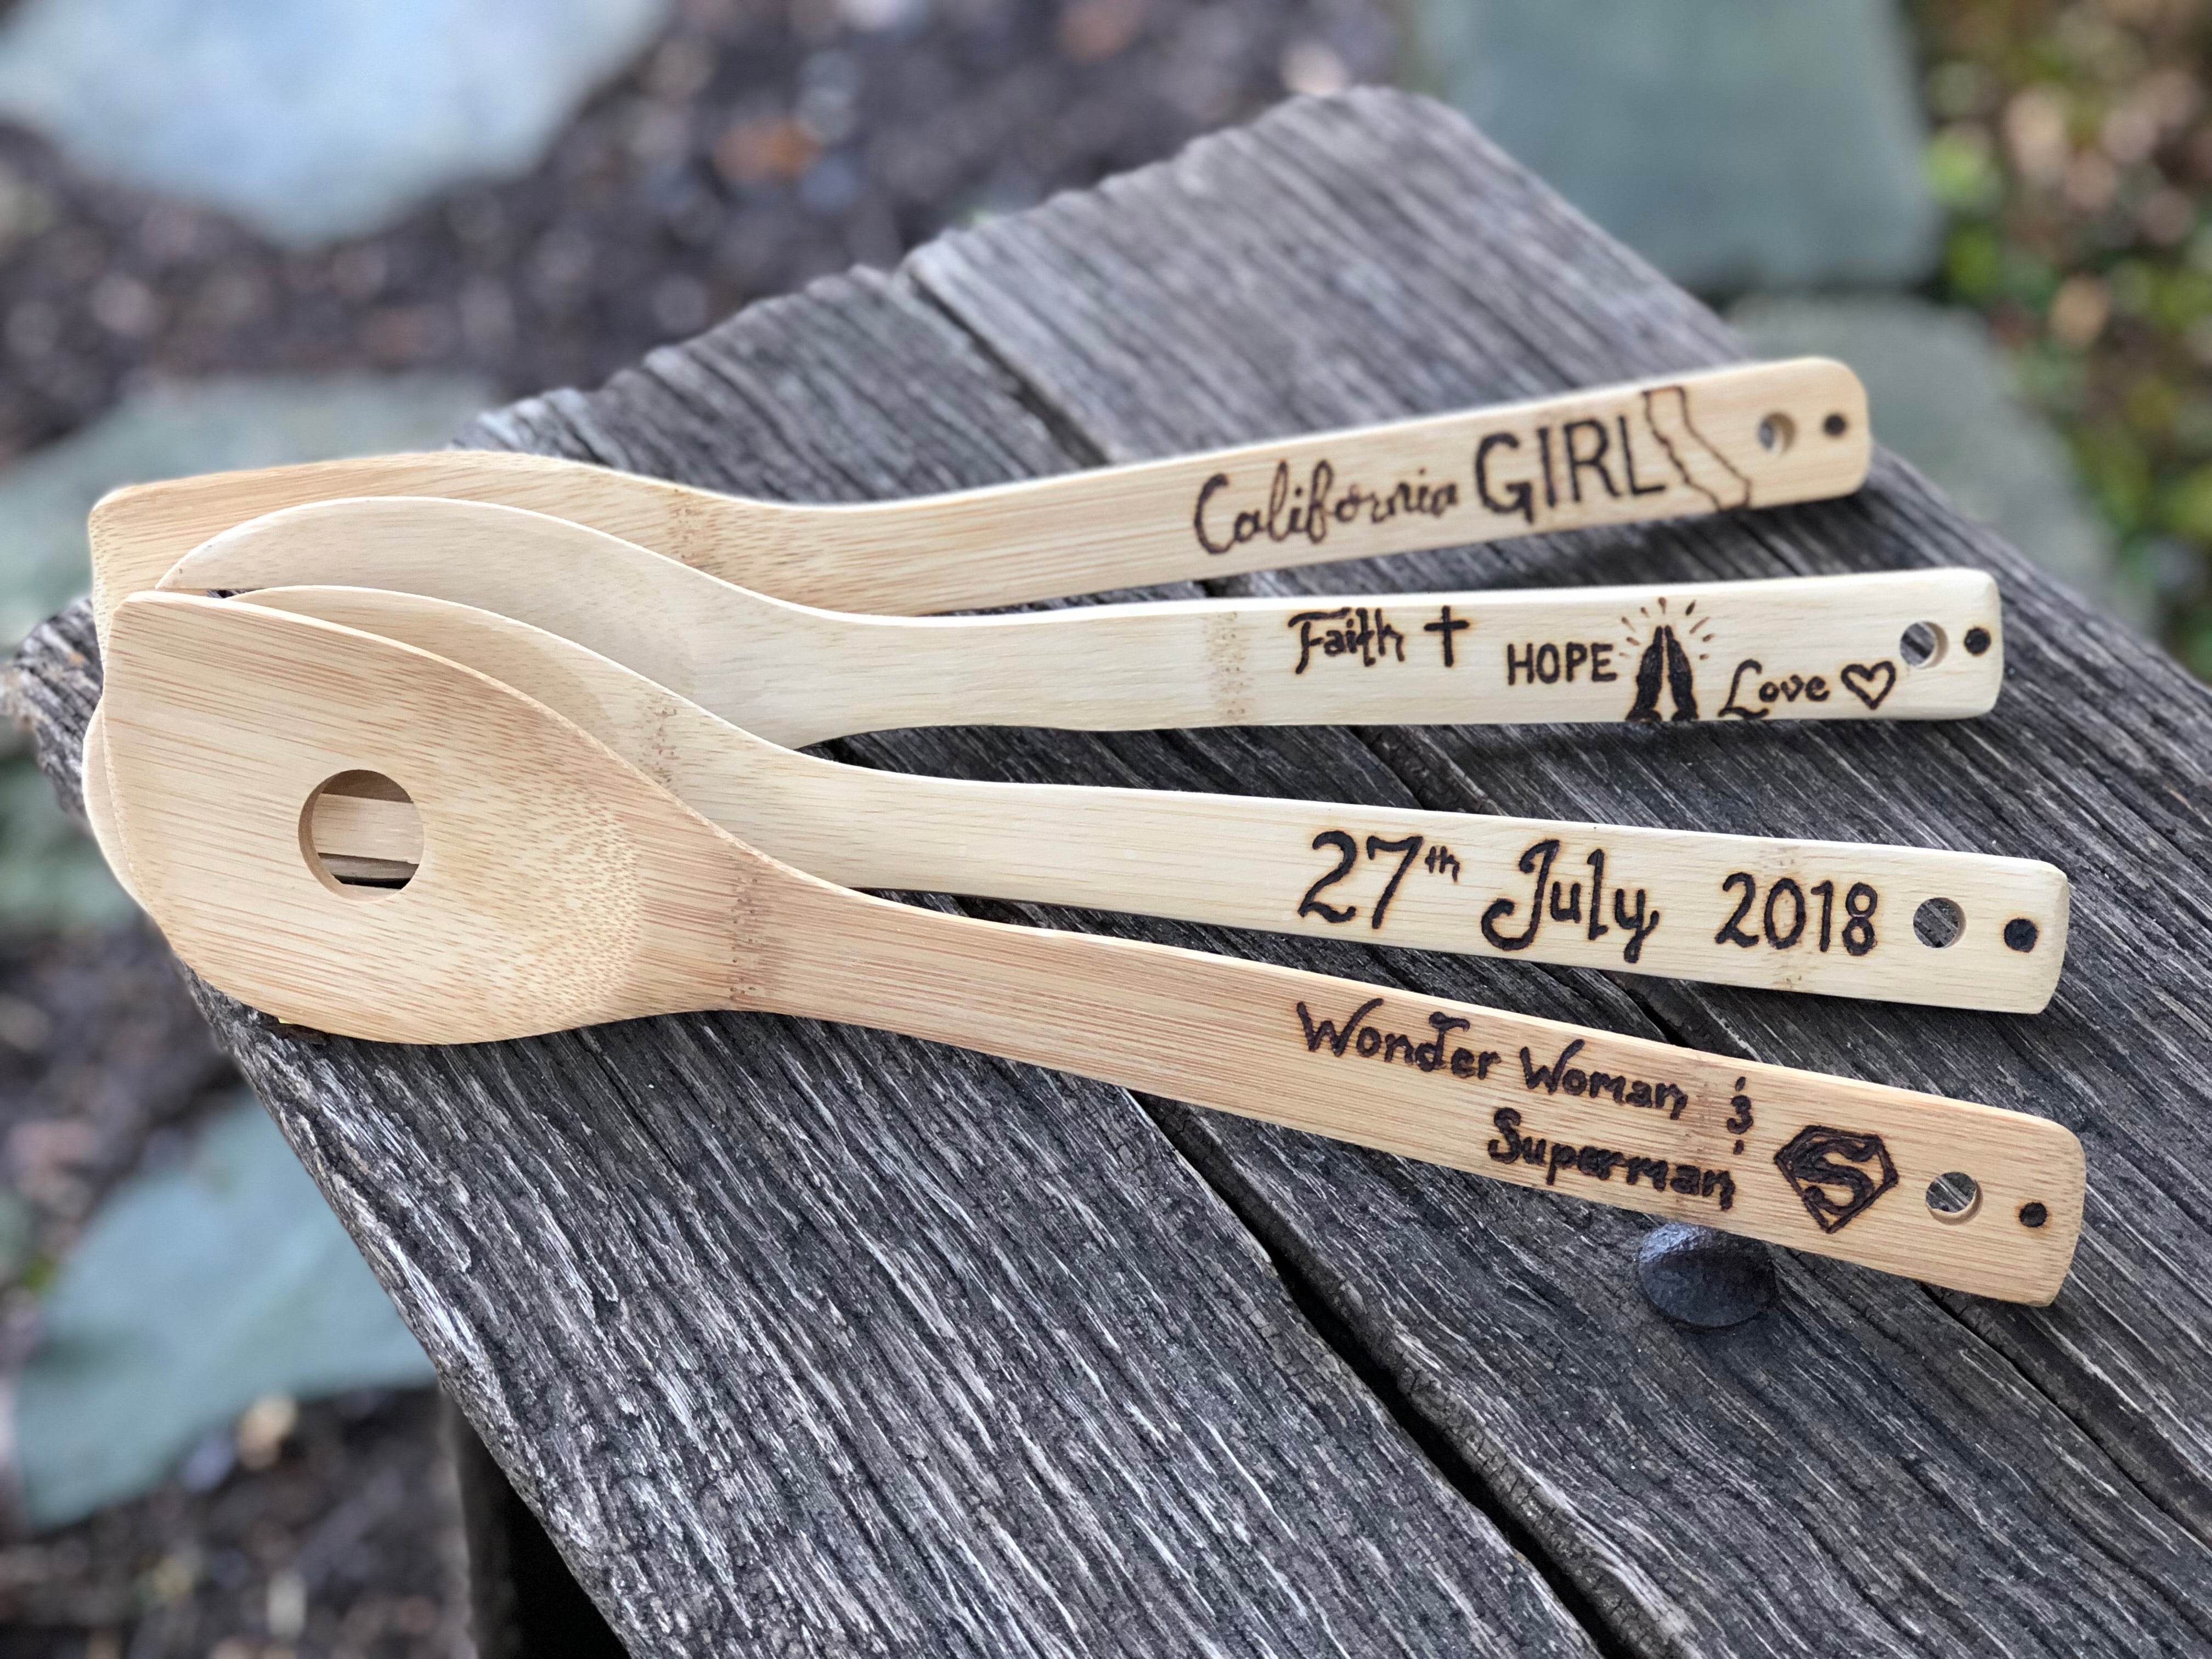 Customized Wooden Spoons/Spatulas -Set of 5